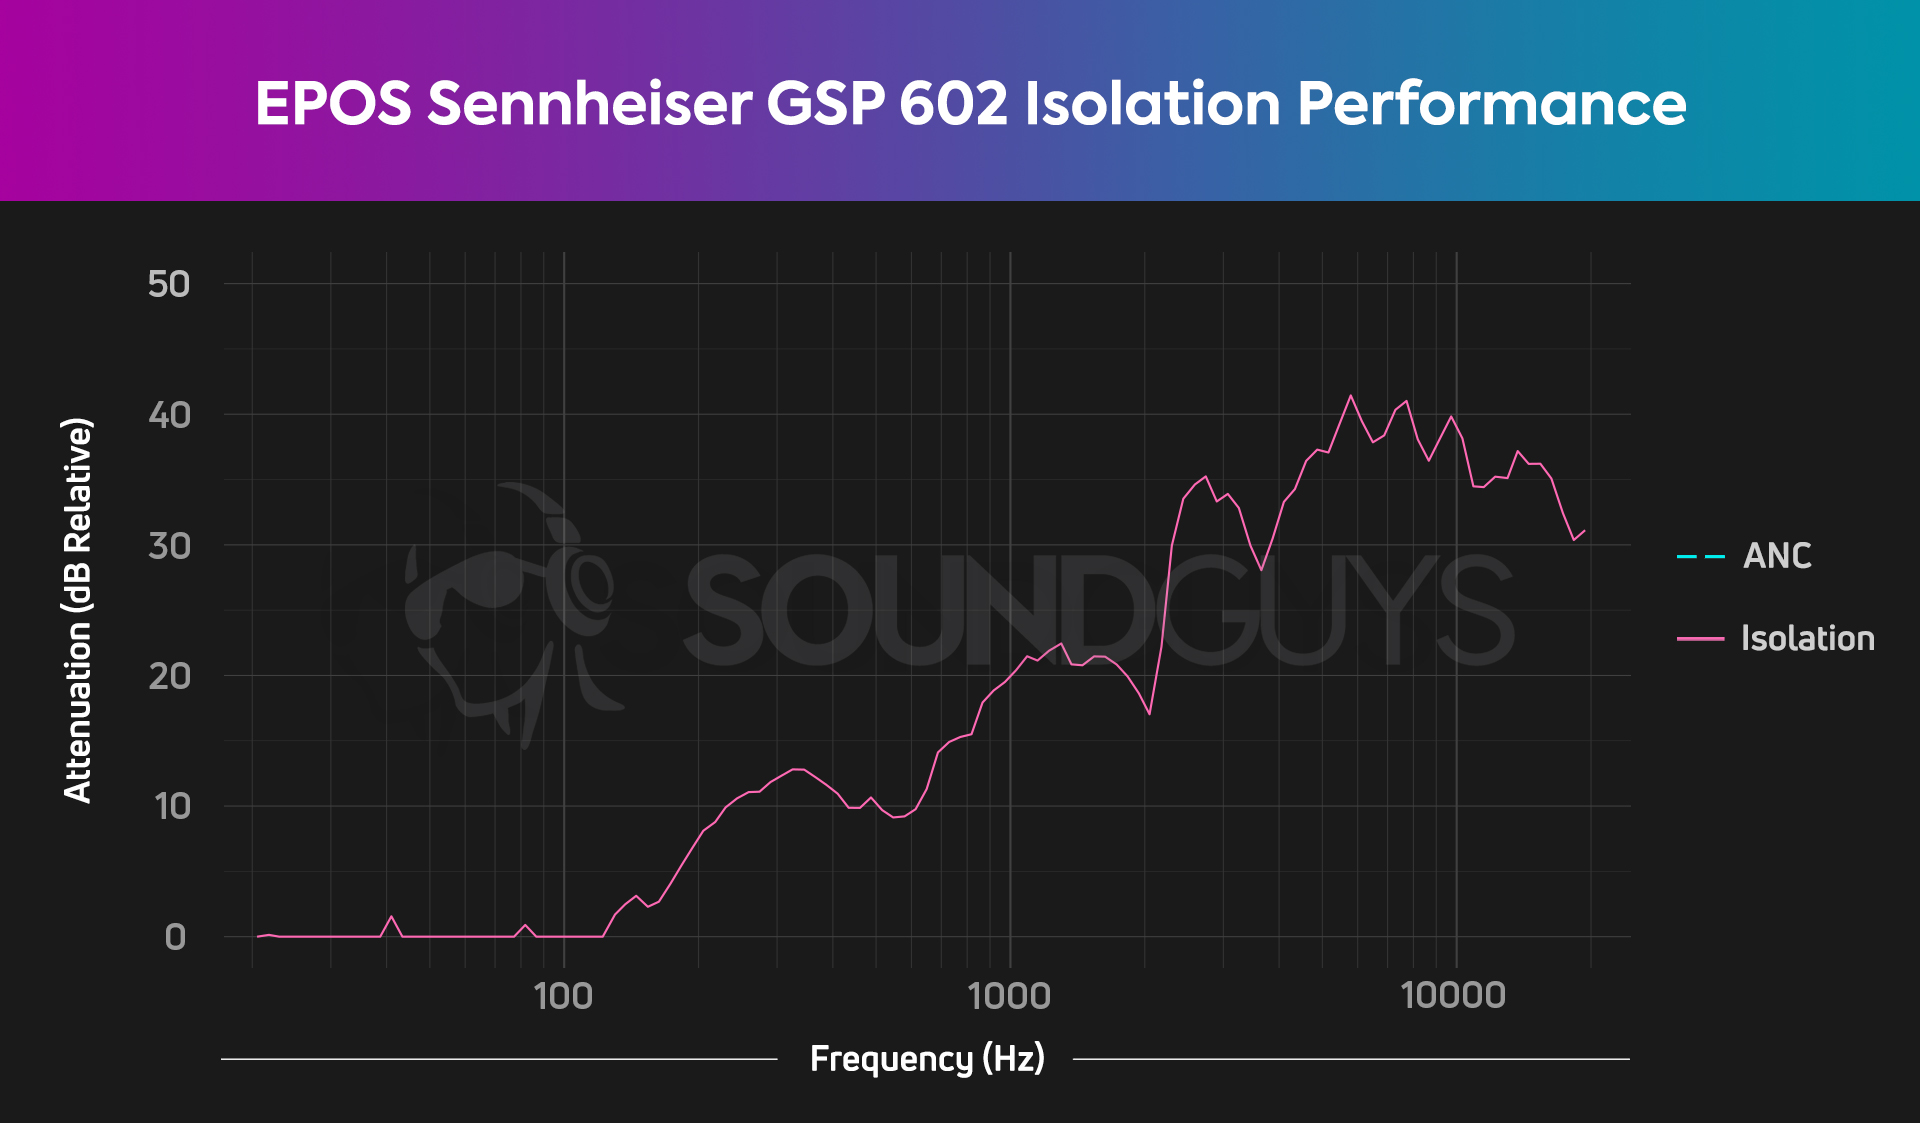 An isolation chart for the EPOS Sennheiser GSP 602, which shows very good isolation for a gaming headset. 